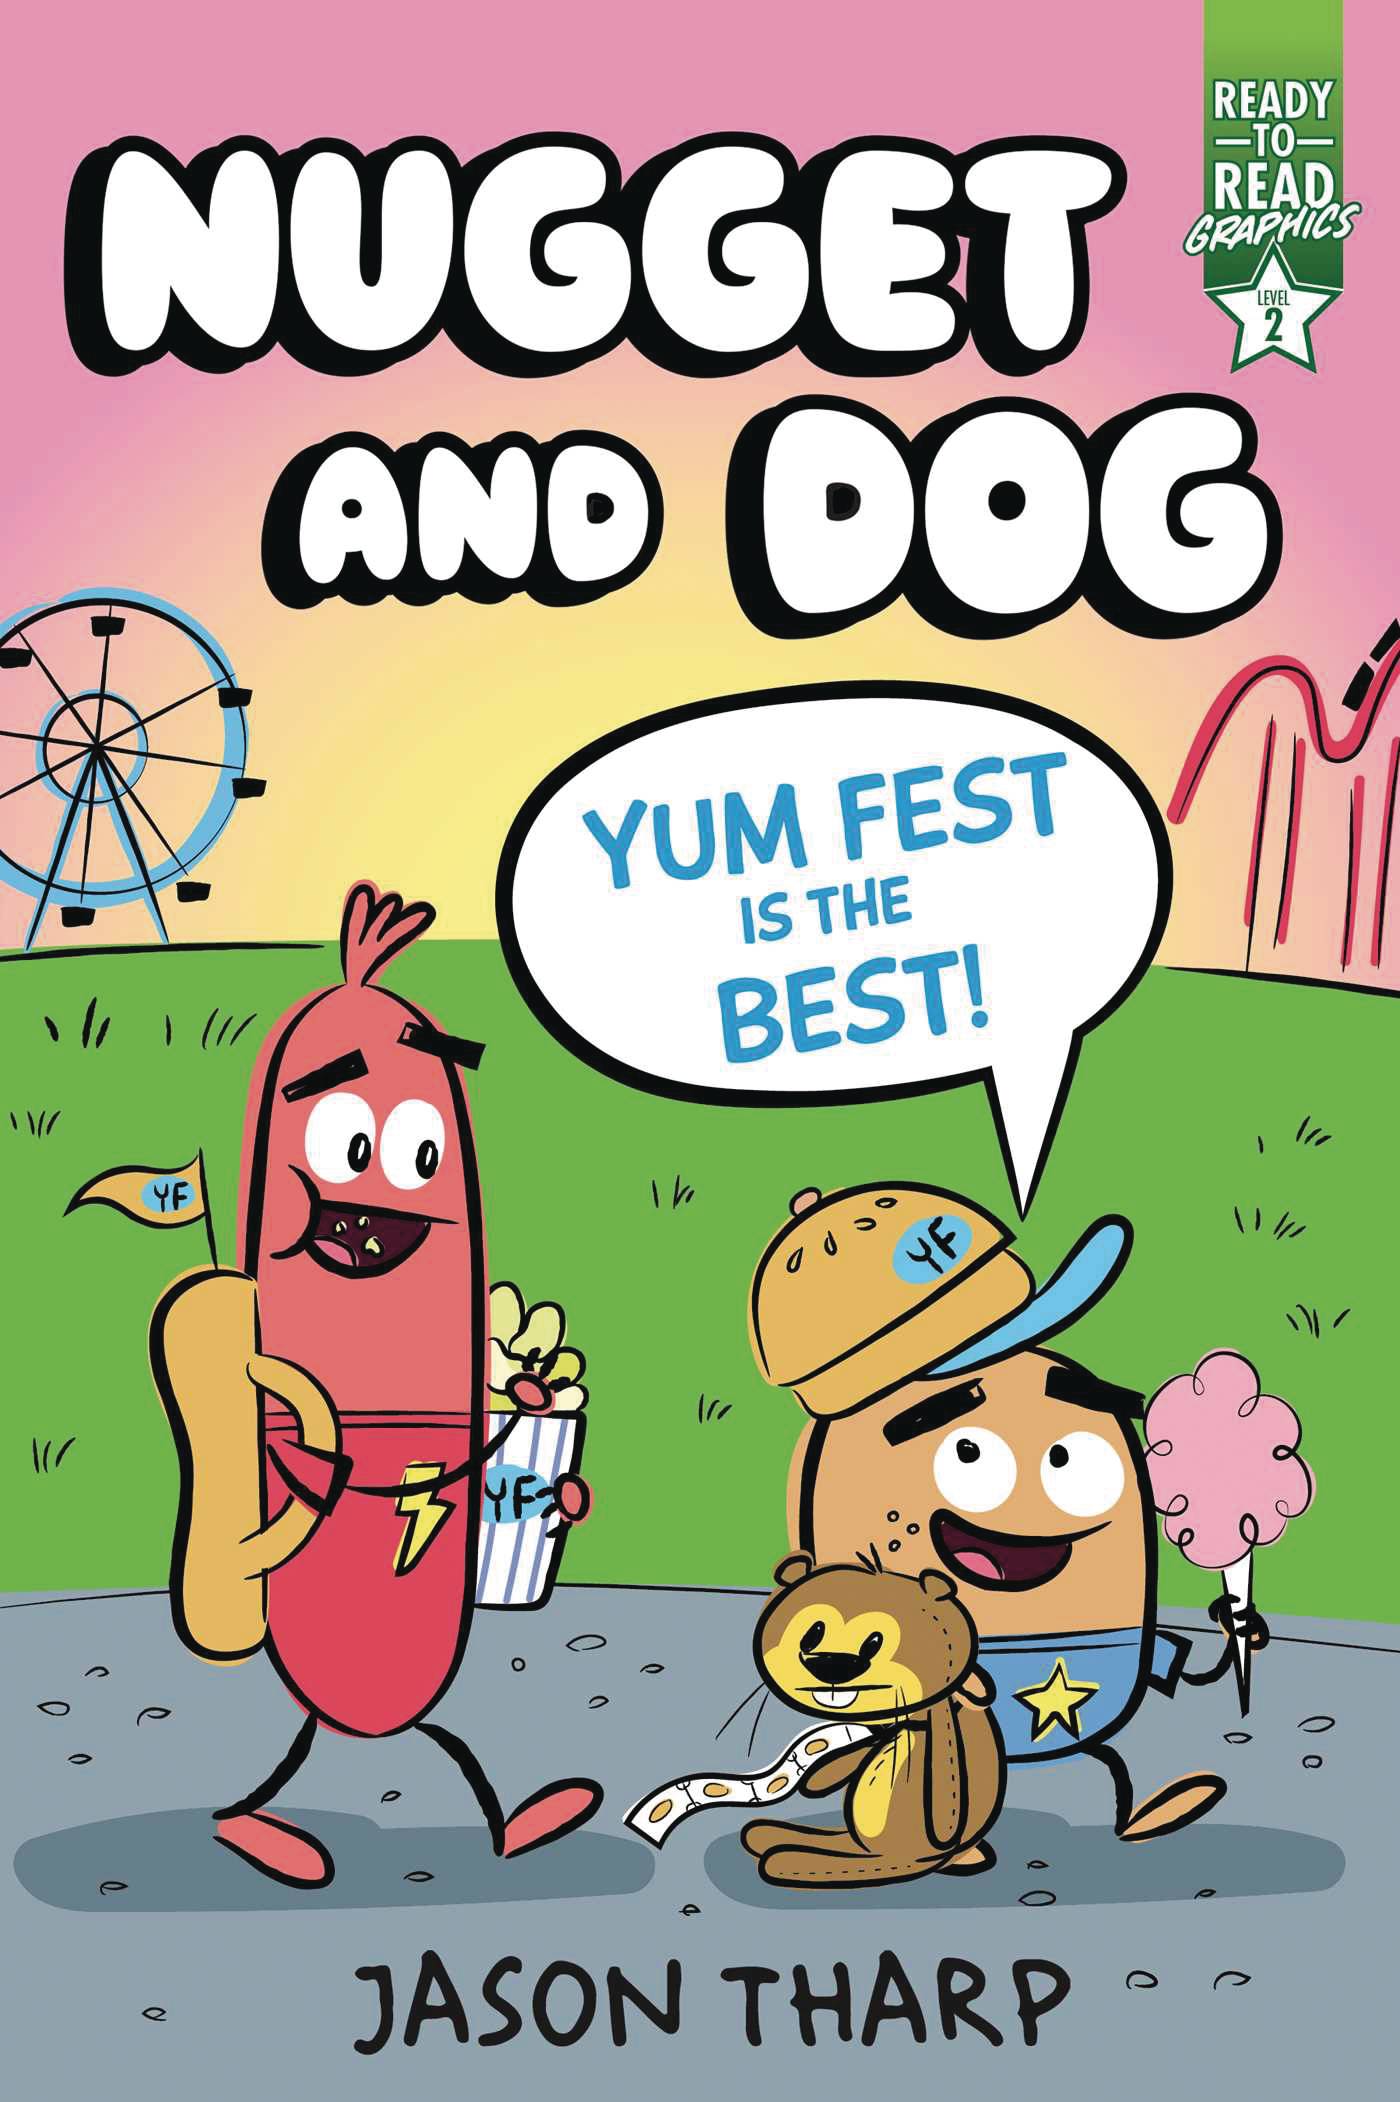 NUGGET AND DOG YR HC GN YUM FEST IS BEST